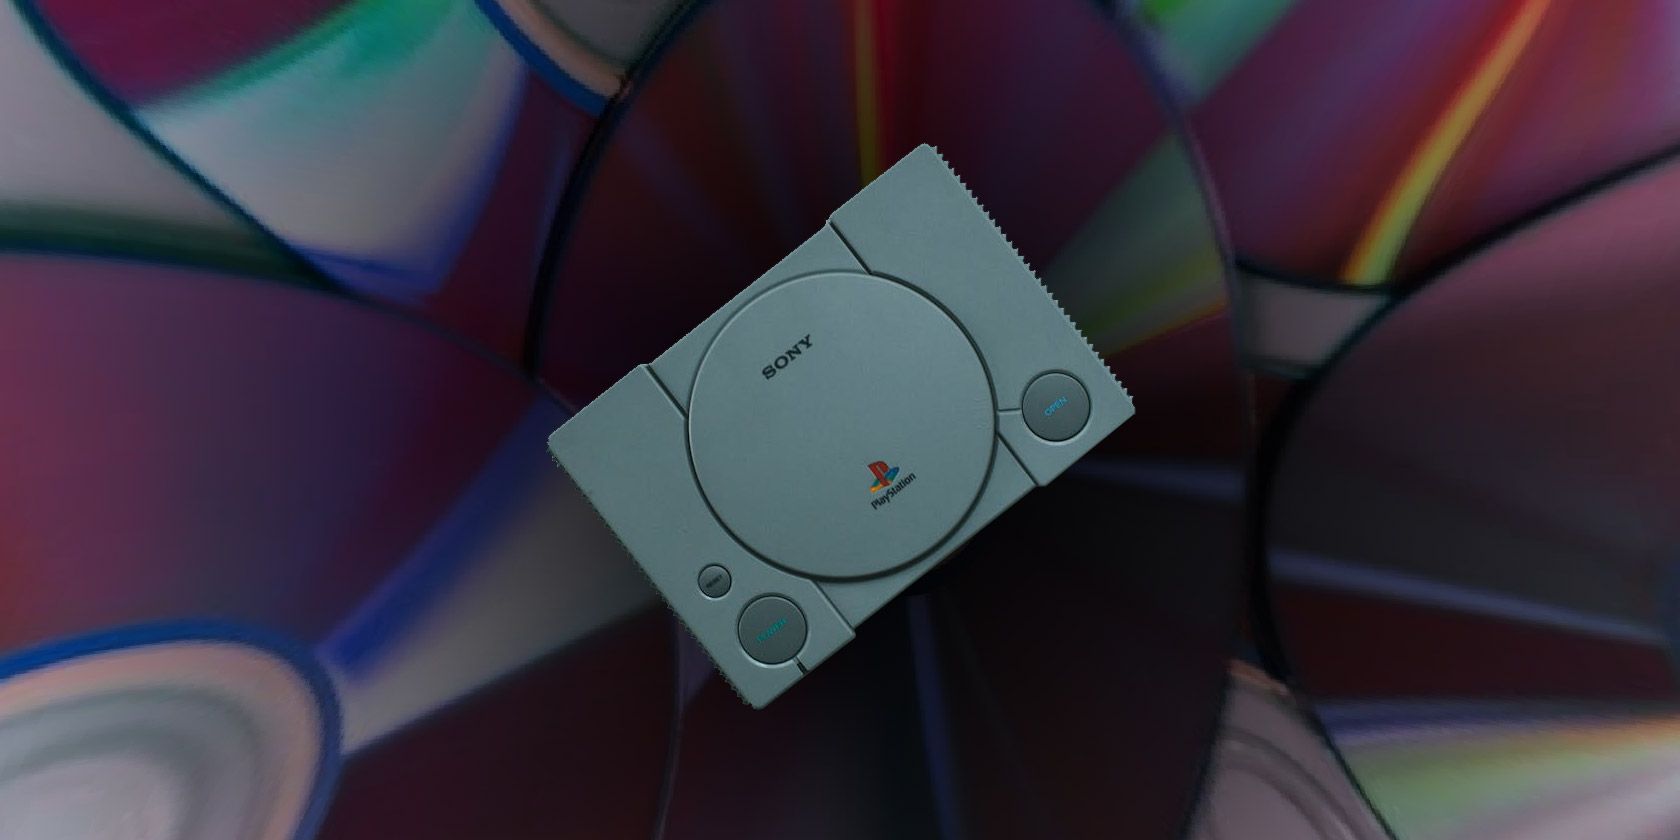 An image of an original PlayStation console layered over CDs